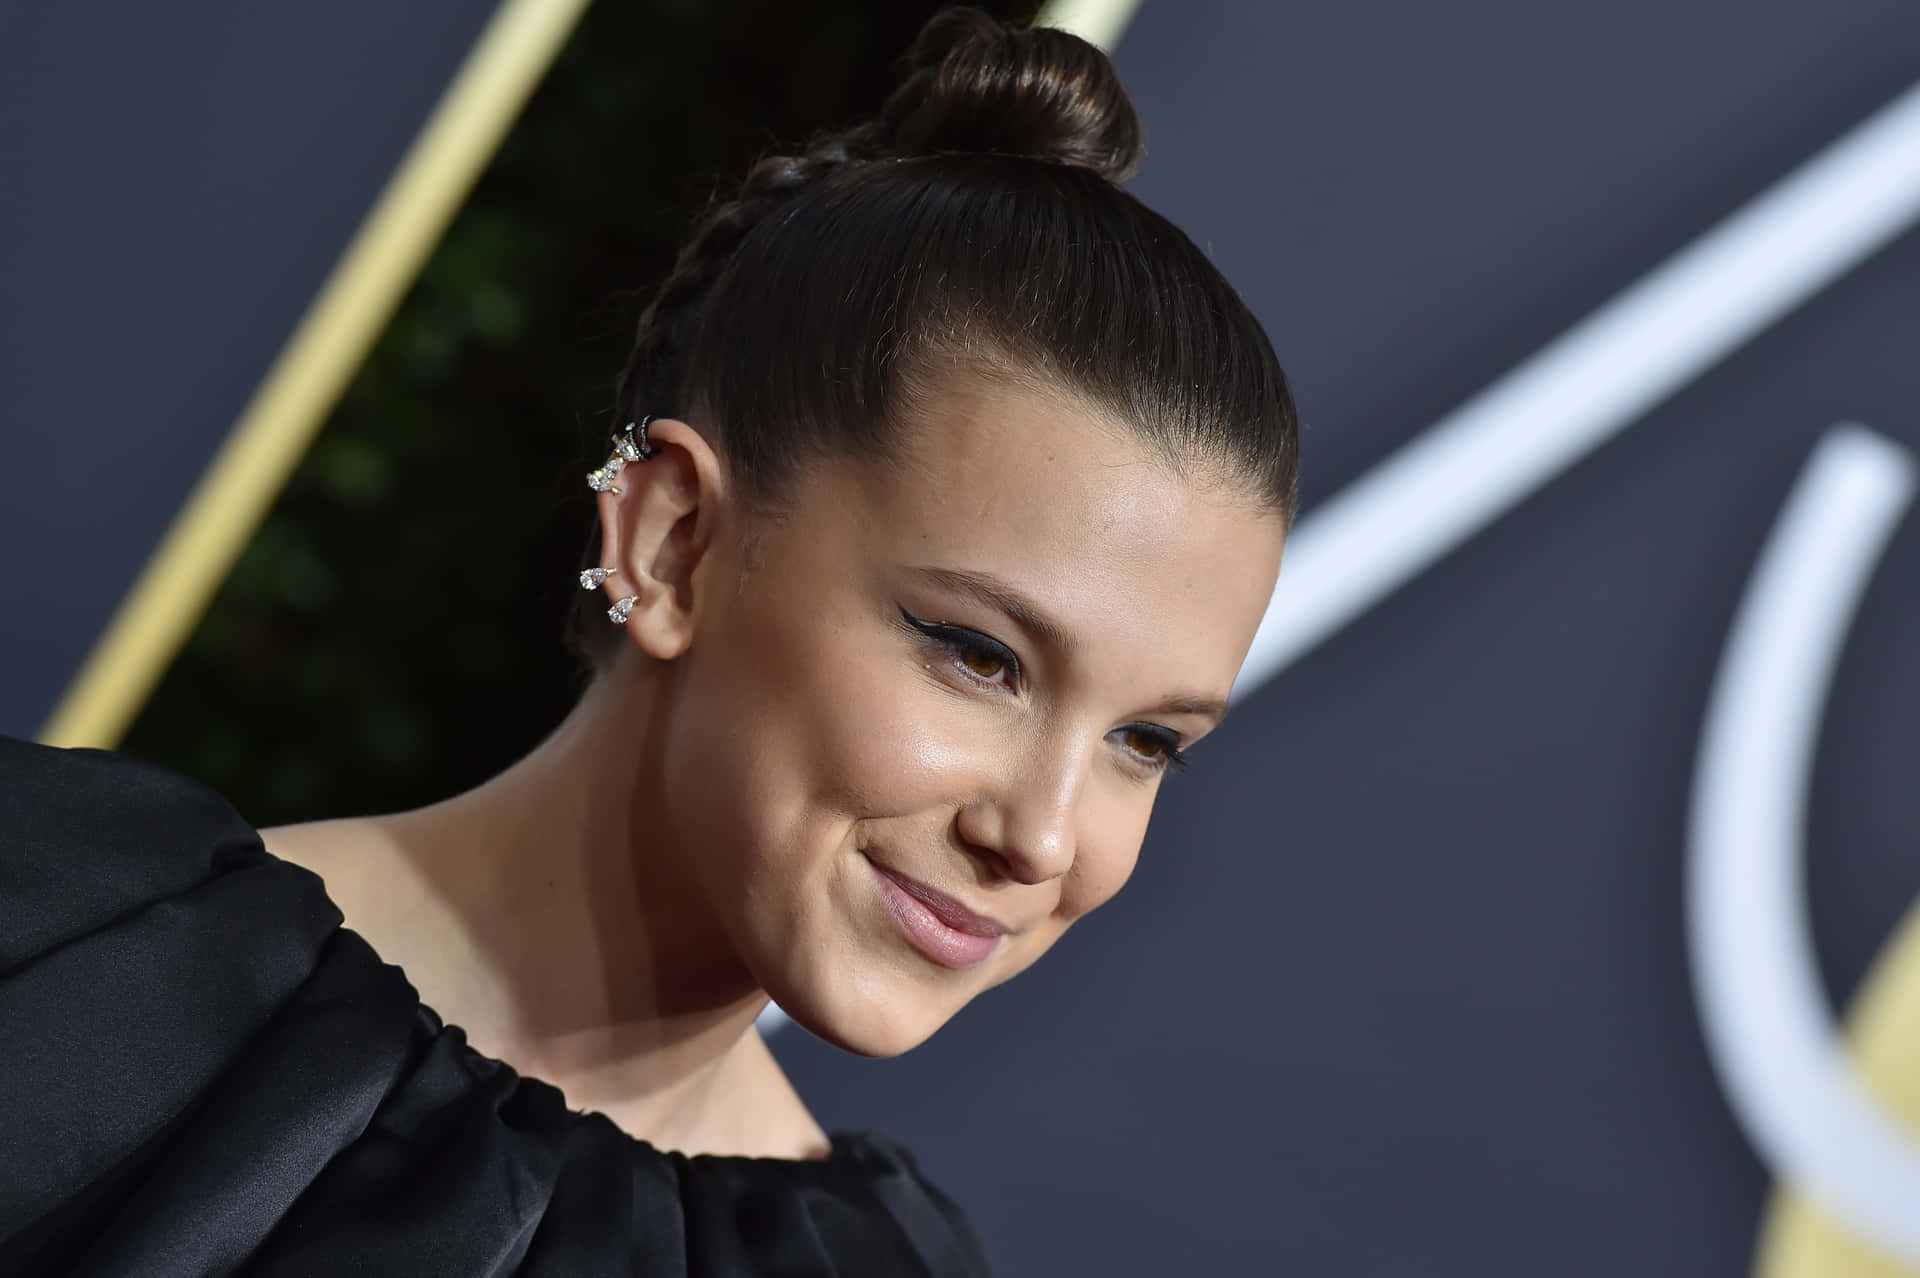 Millie Bobby Brown looking confident and stylish